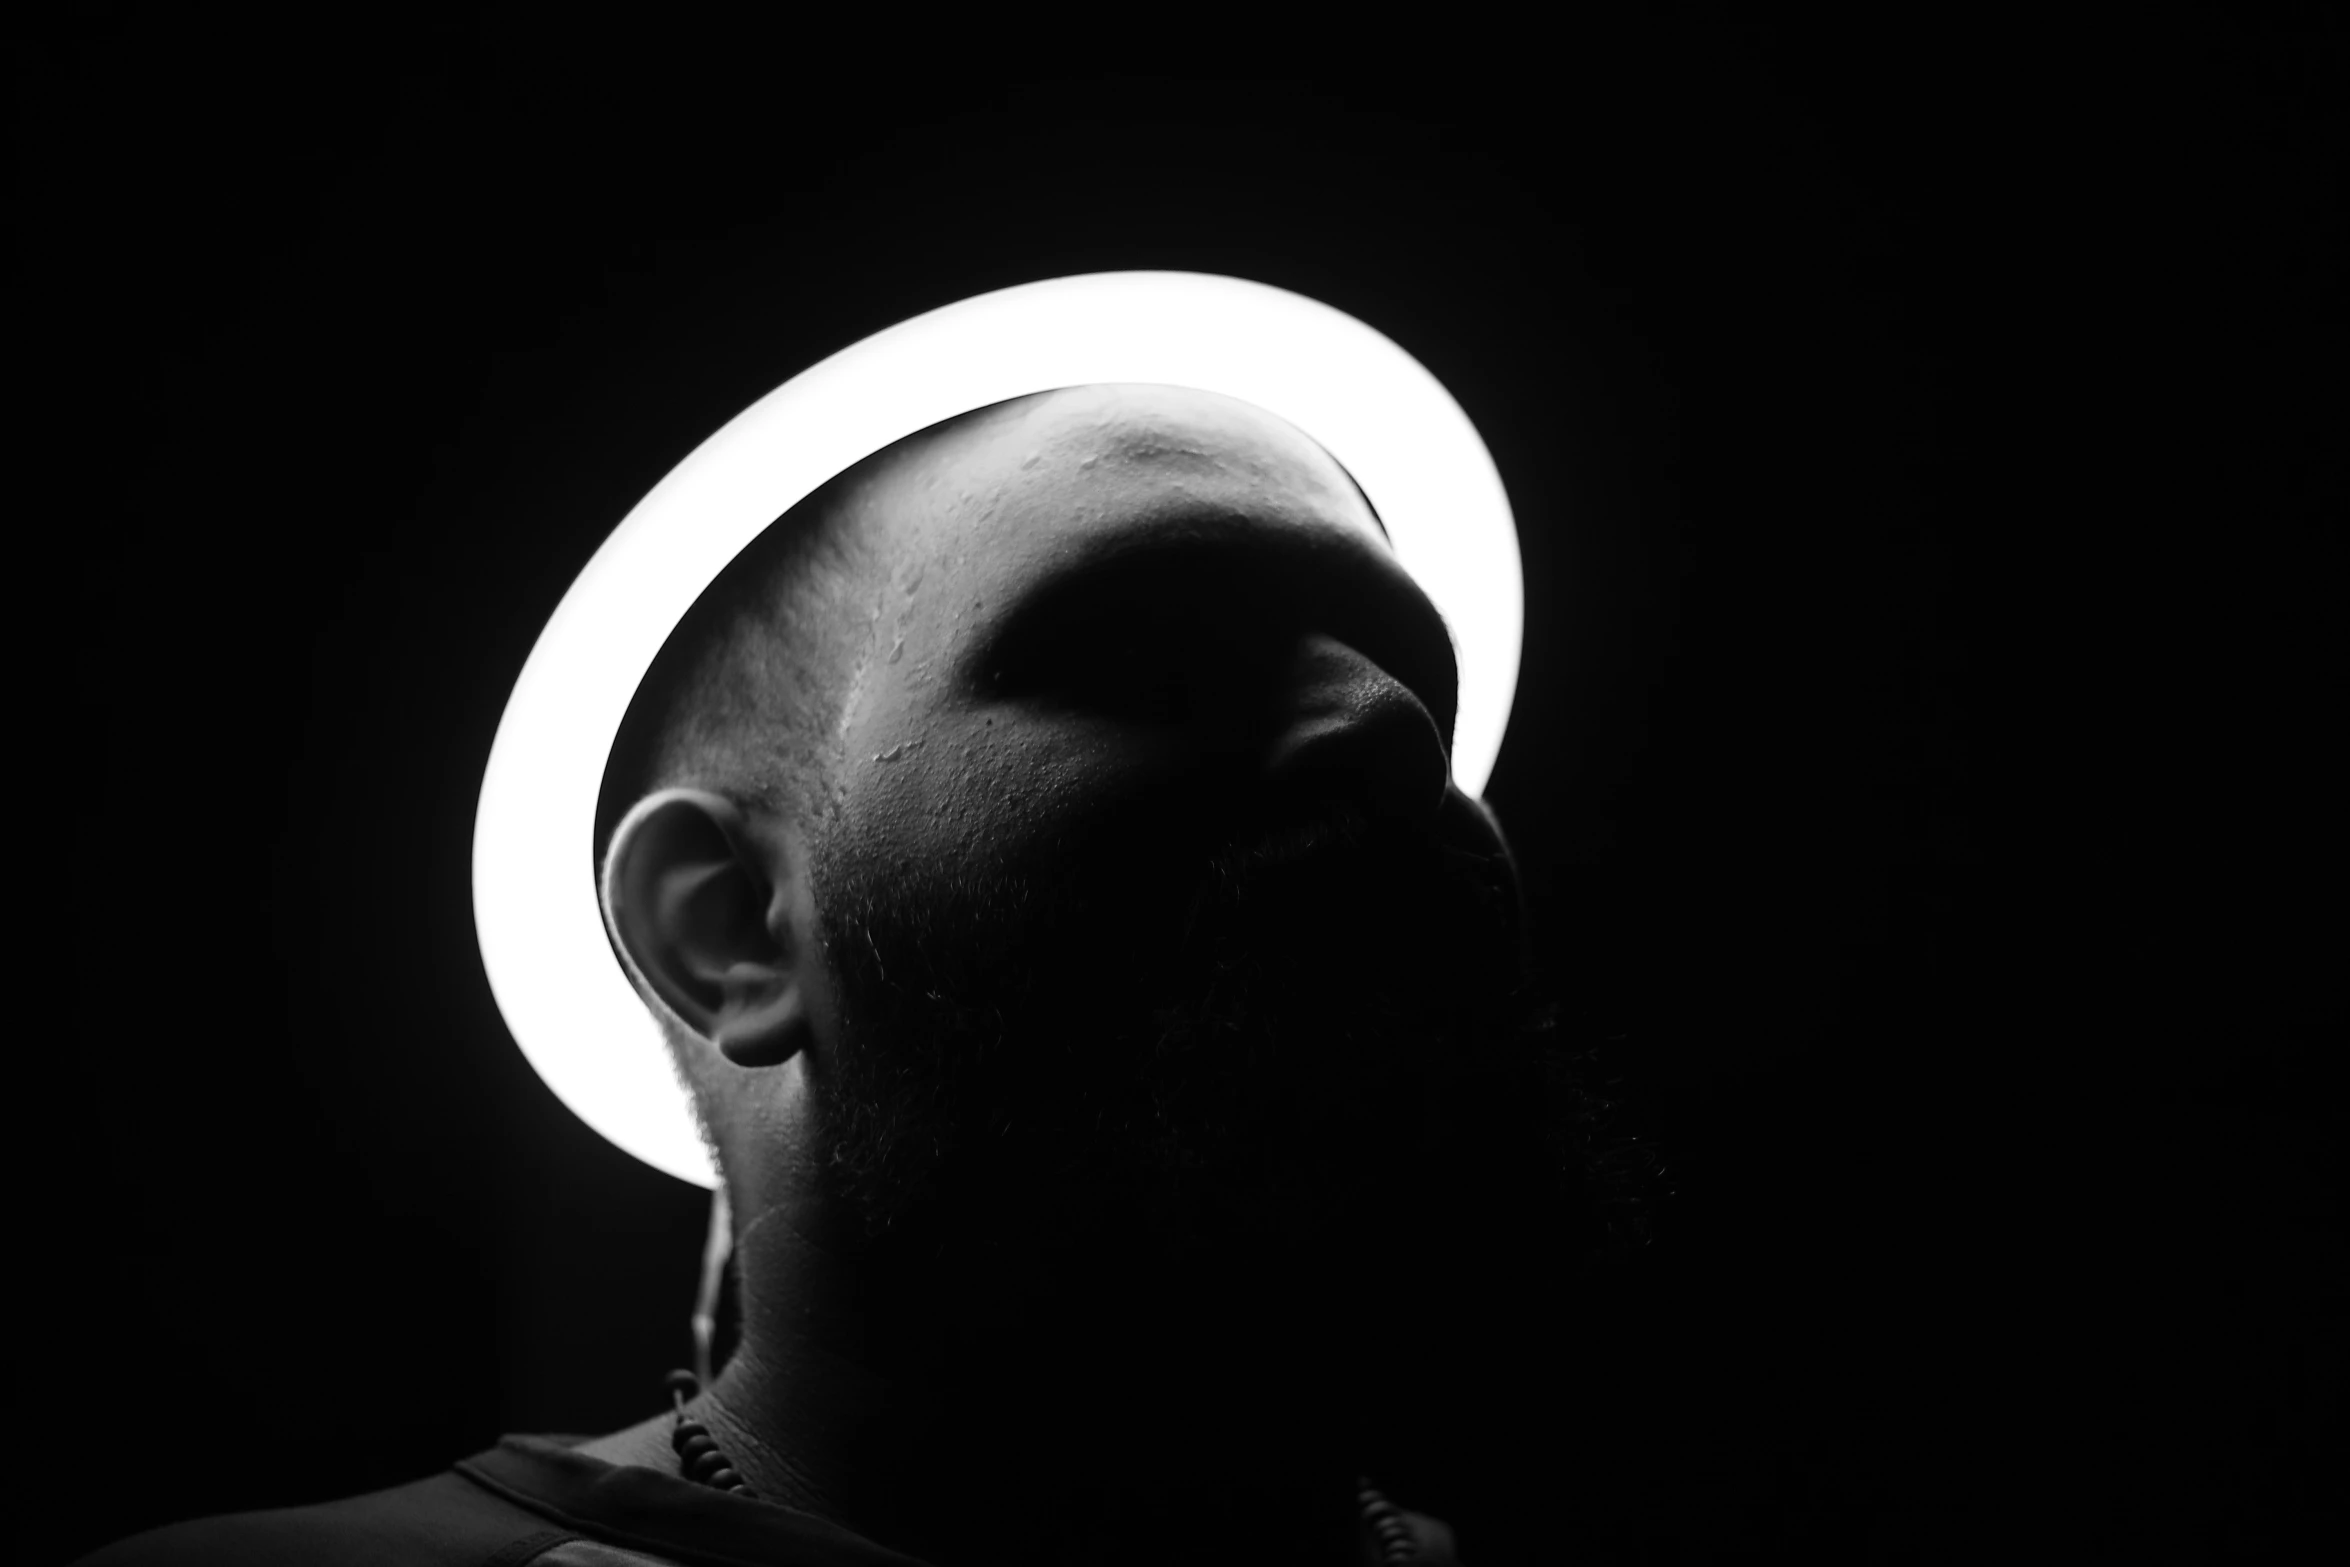 the profile of a man with an illuminated ring around his face